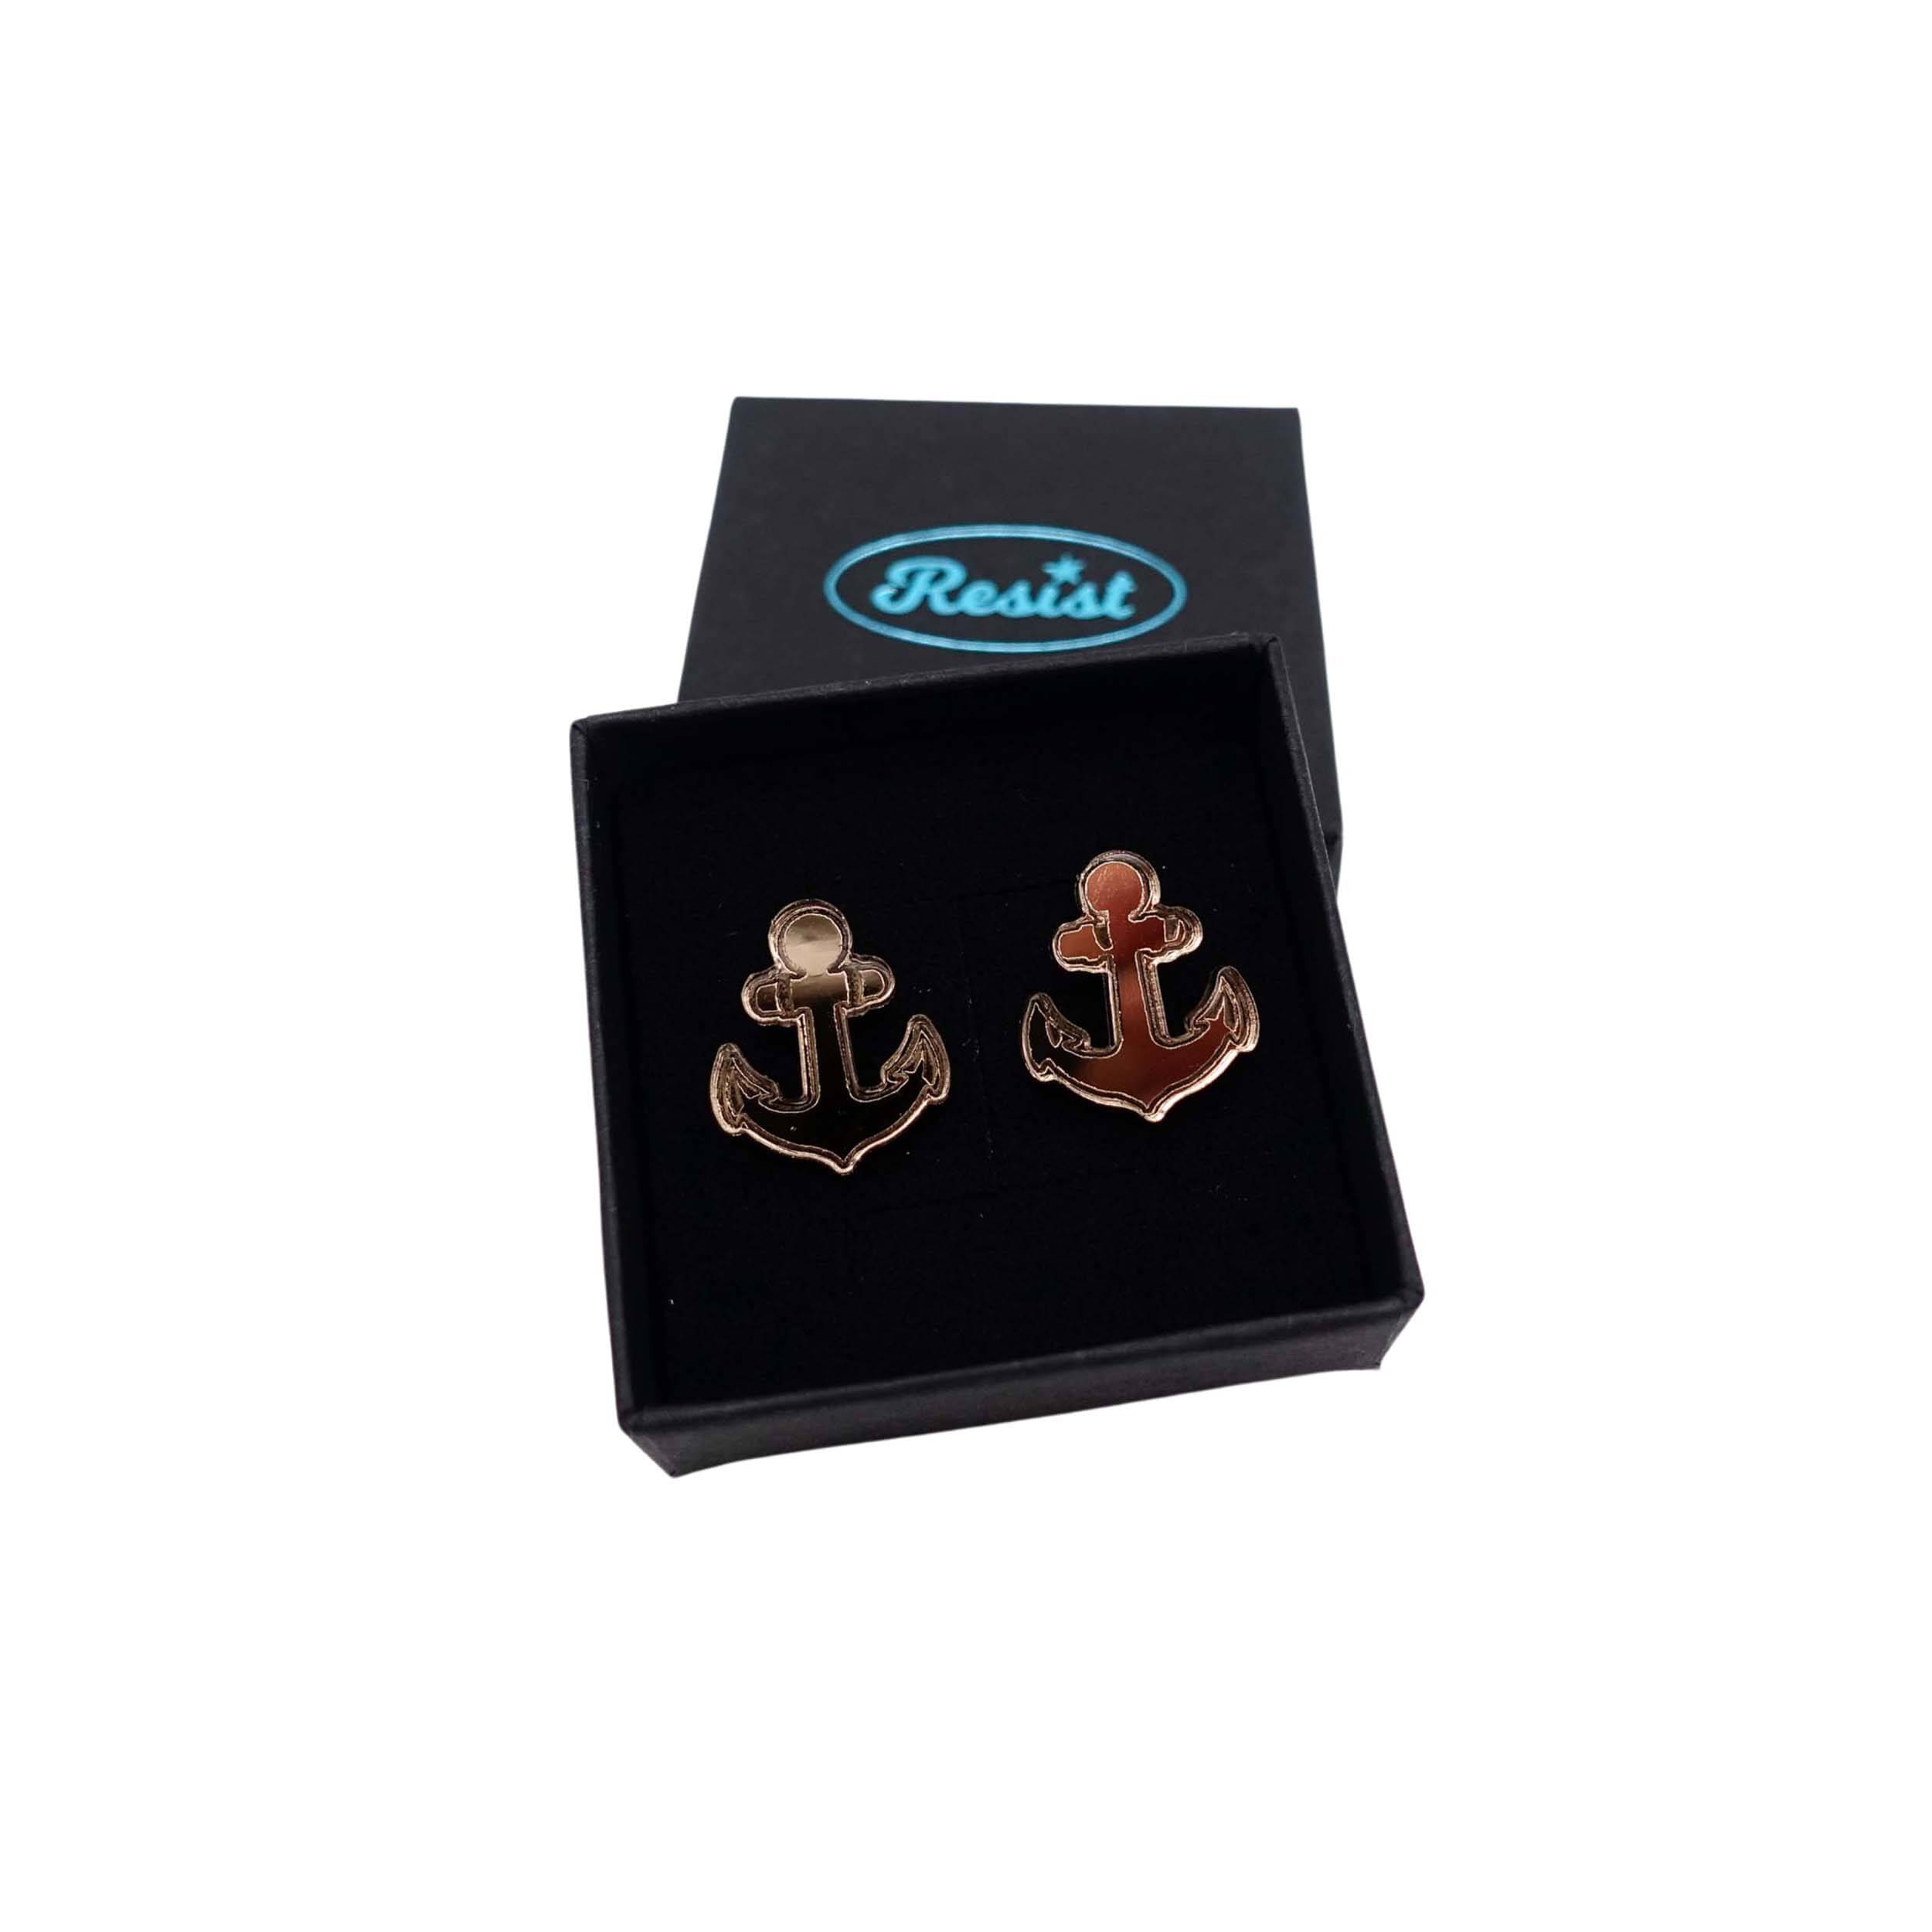 Bronze mirror little anchor earrings shown in a Wear and Resist gift box. 